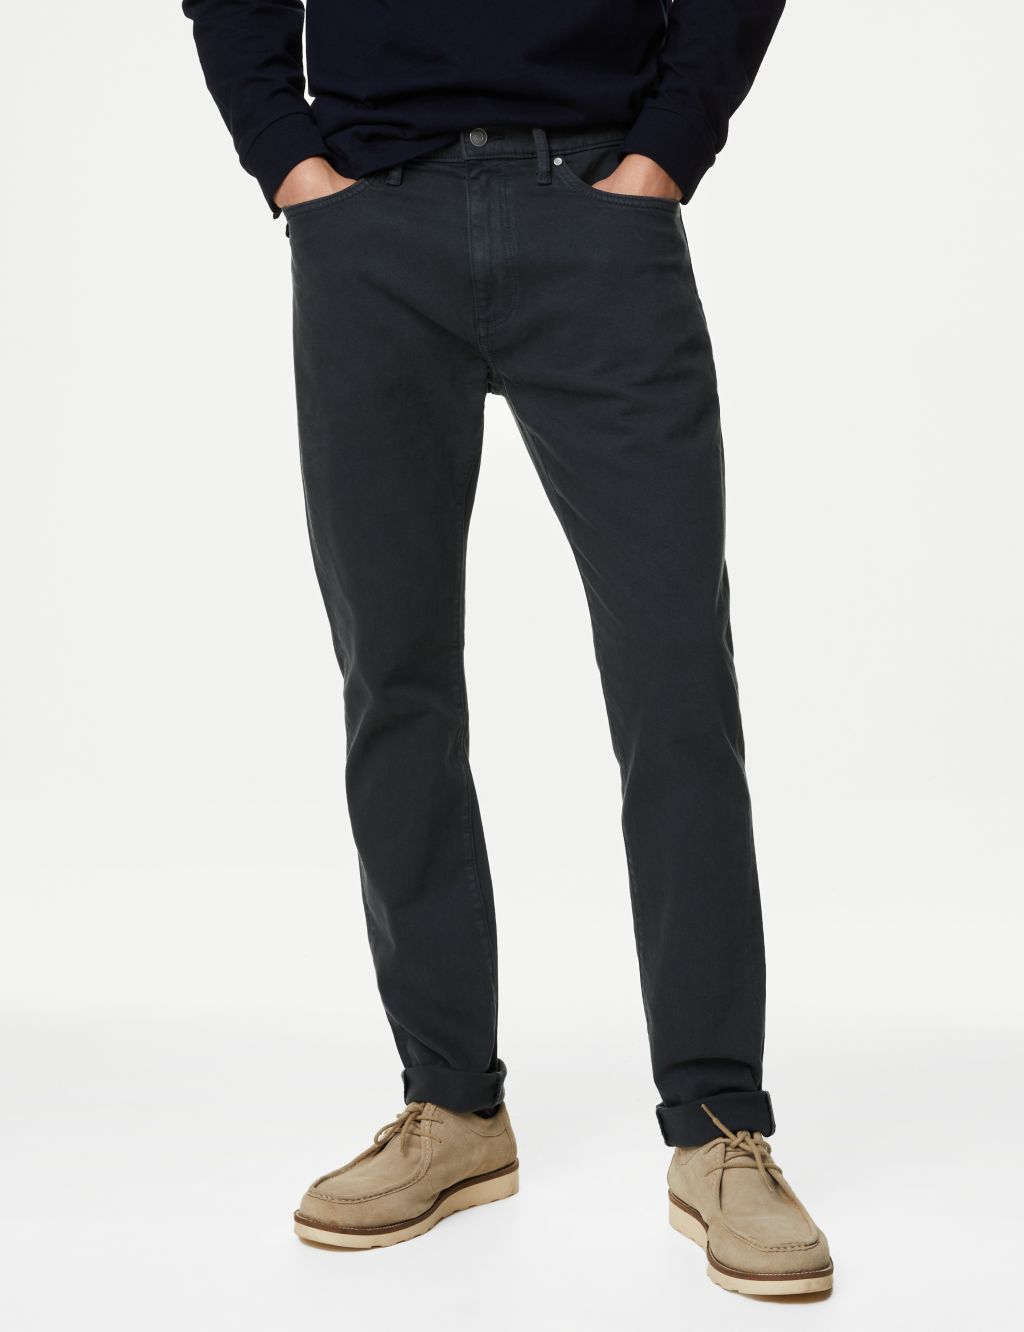 Slim Fit Tea Dyed Stretch Jeans image 1